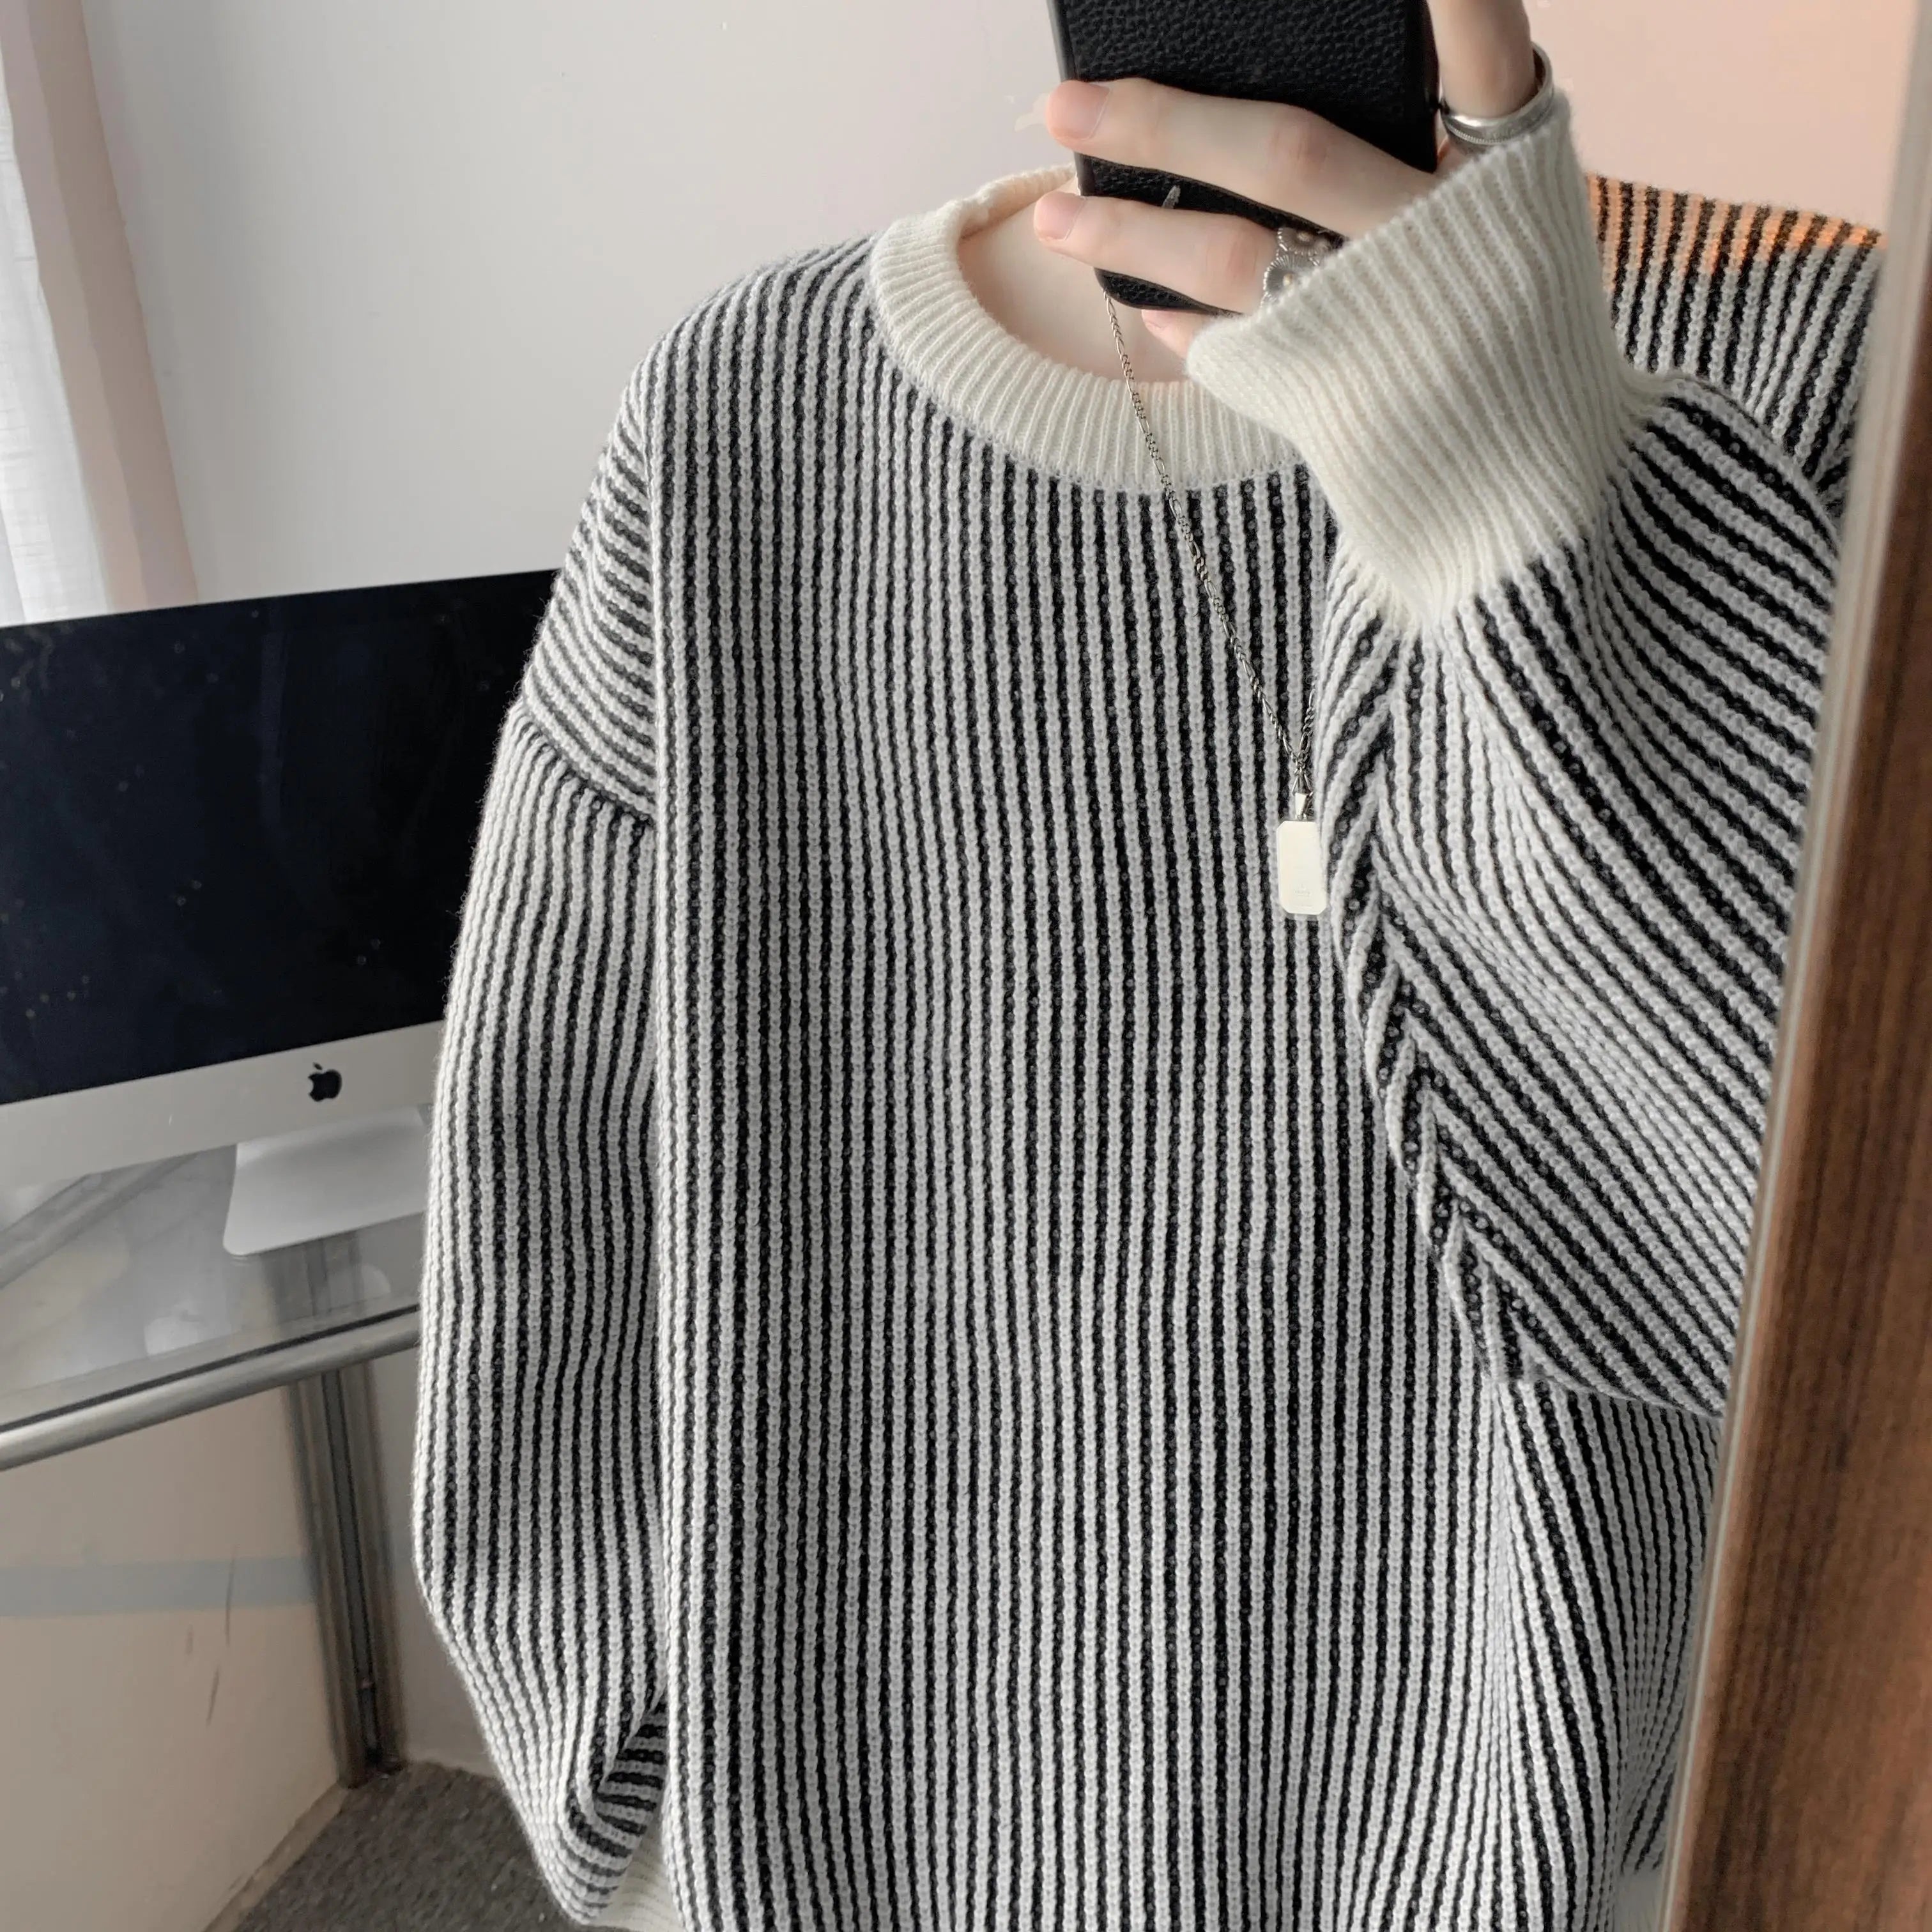 Voguable Striped Knitted Sweater Coat Men Japanese Oversize Casual Autumn Winter Loose O-neck Pullovers for Man Streetwear voguable